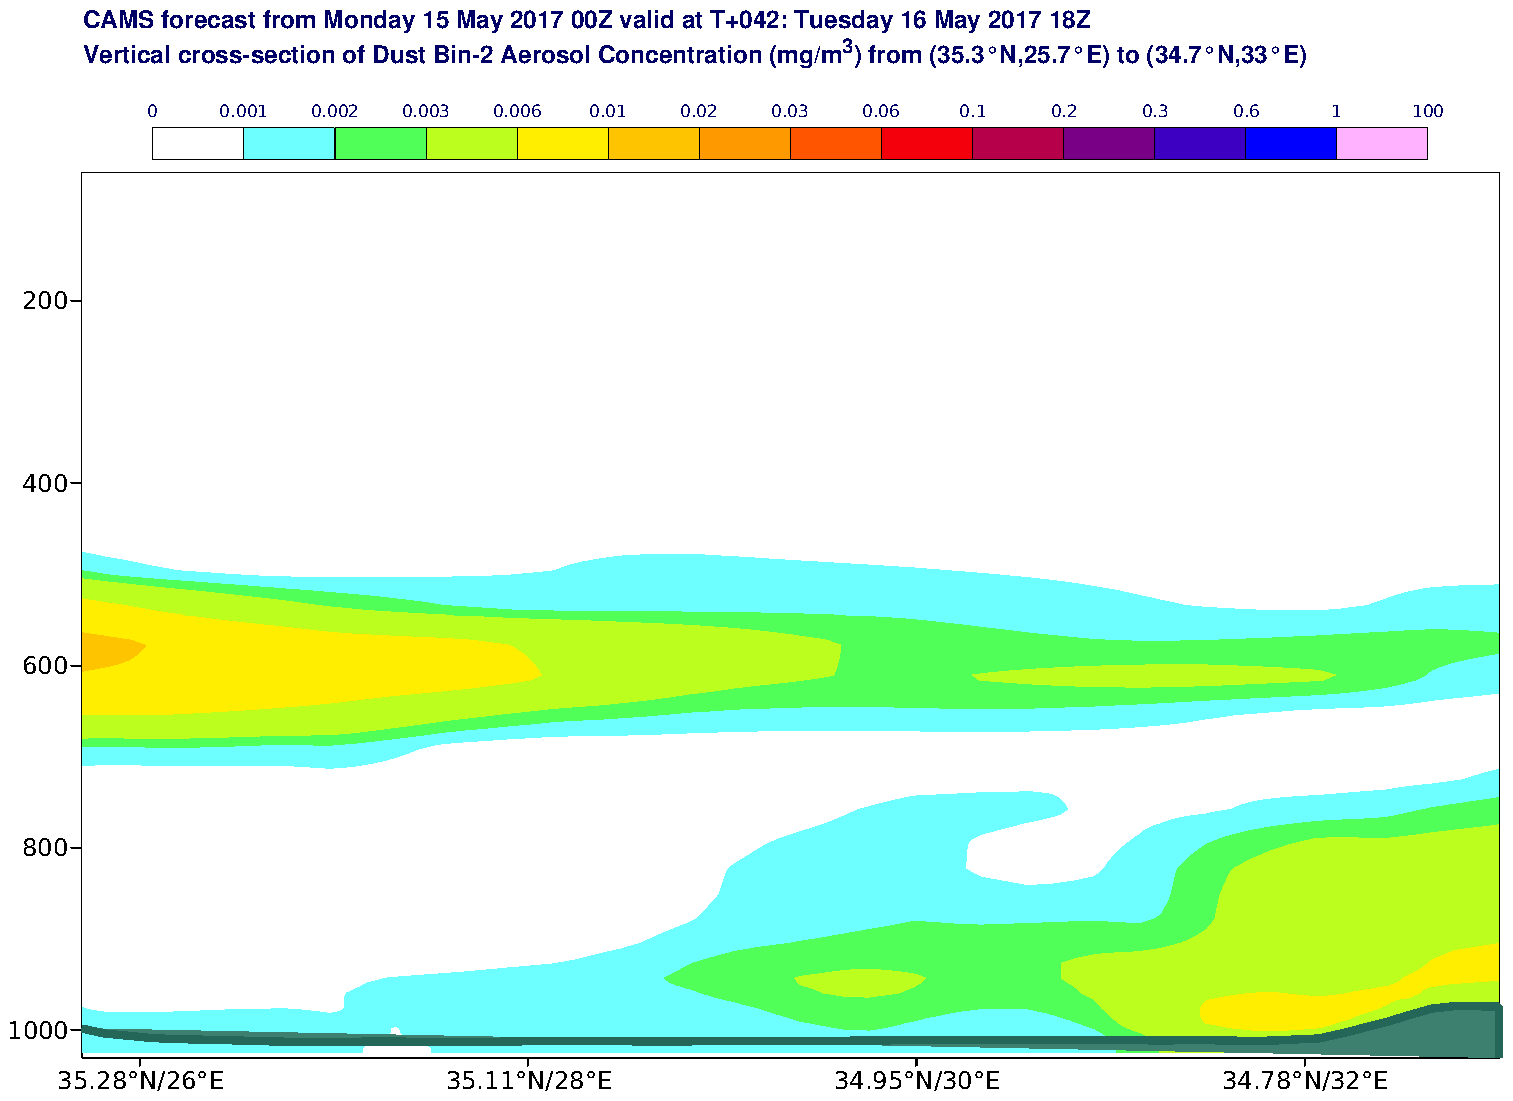 Vertical cross-section of Dust Bin-2 Aerosol Concentration (mg/m3) valid at T42 - 2017-05-16 18:00